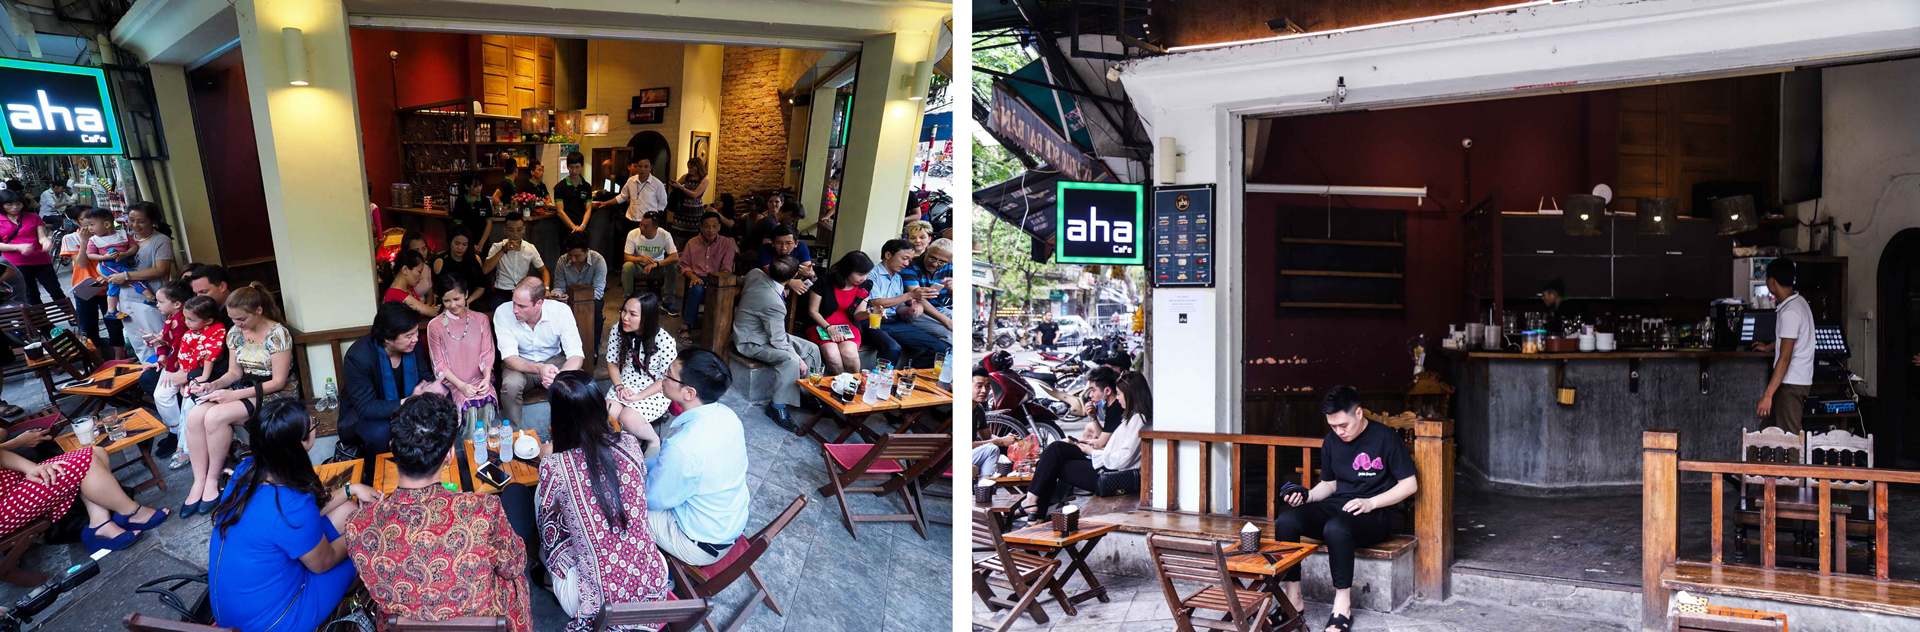 A coffee shop on Thuoc Bac Street in Hanoi, Vietnam where Prince William, Duke of Cambridge, previously visited during his Vietnam visit in 2016 (left) is nearly empty of customers (right) during the COVID-19 epidemic. Photo: Nguyen Khanh - Danh Trong / Tuoi Tre